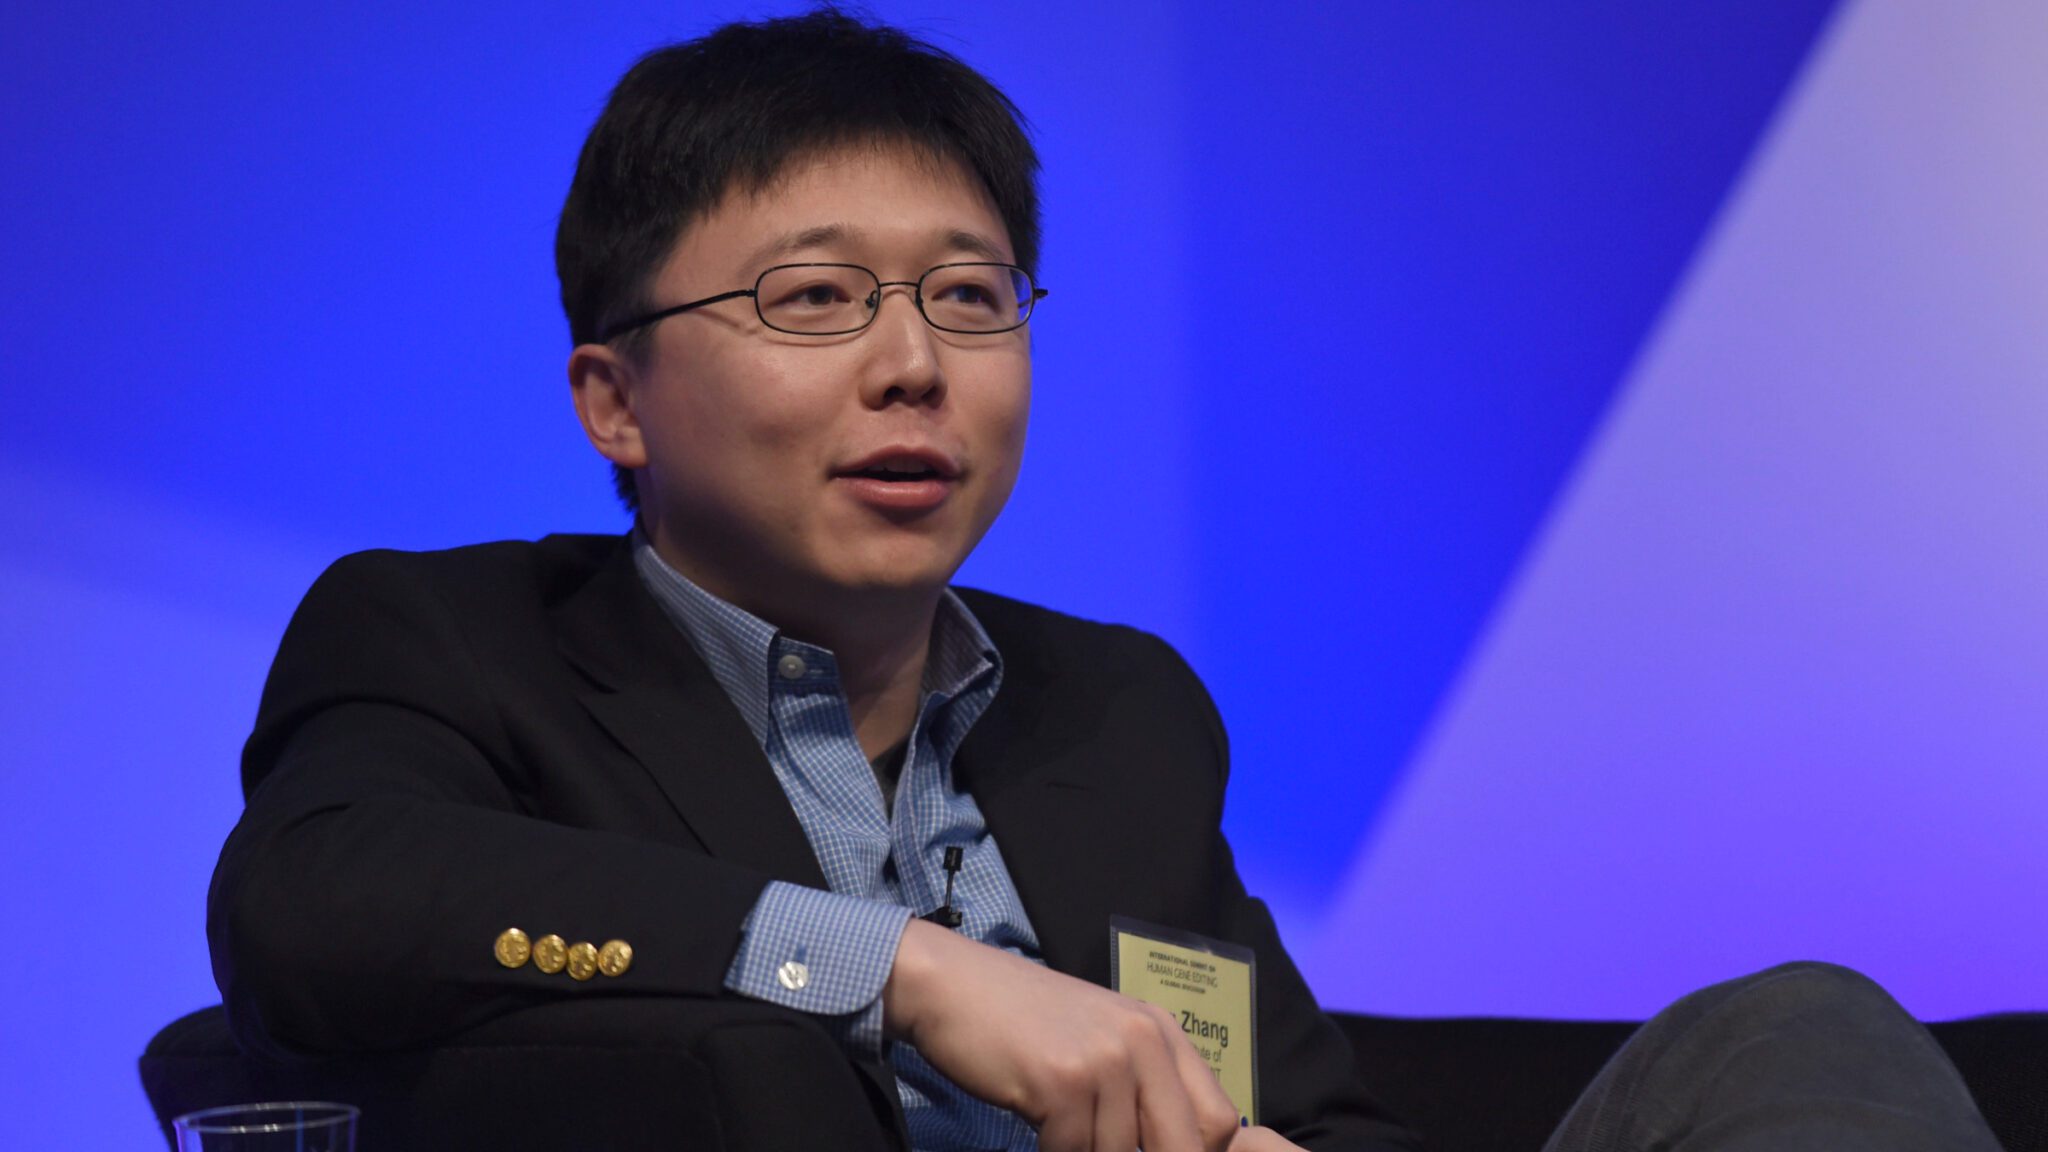 Feng Zhang’s quiet spinout snares $215M in a race for the next big CRISPR company